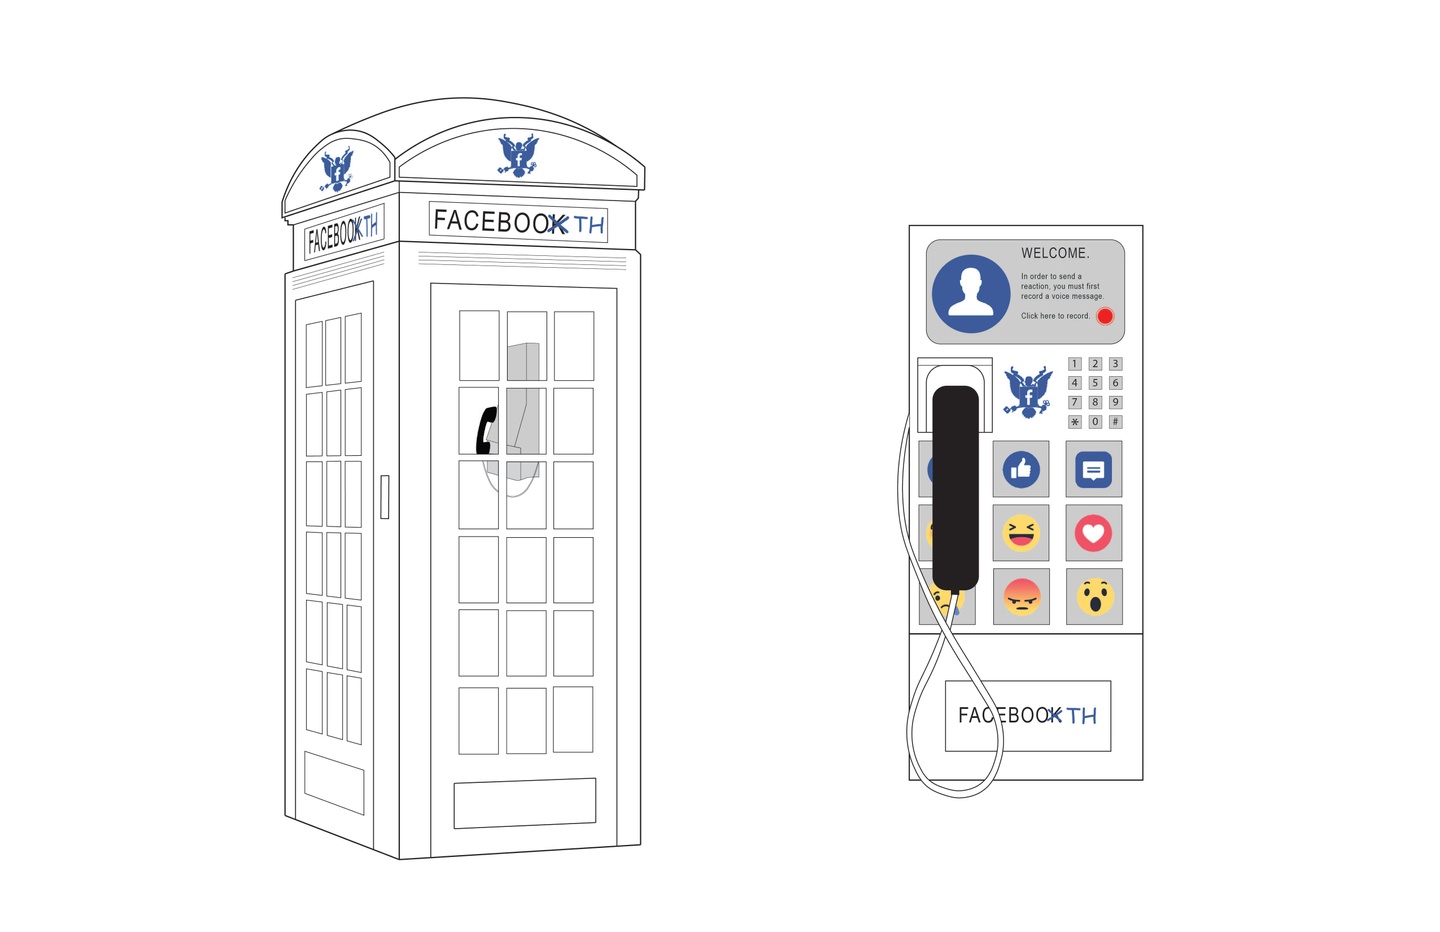 Perspective drawing of a "Facebooth" which looks like a telephone booth but with a large keypad with reaction emojis in addition to a phone.